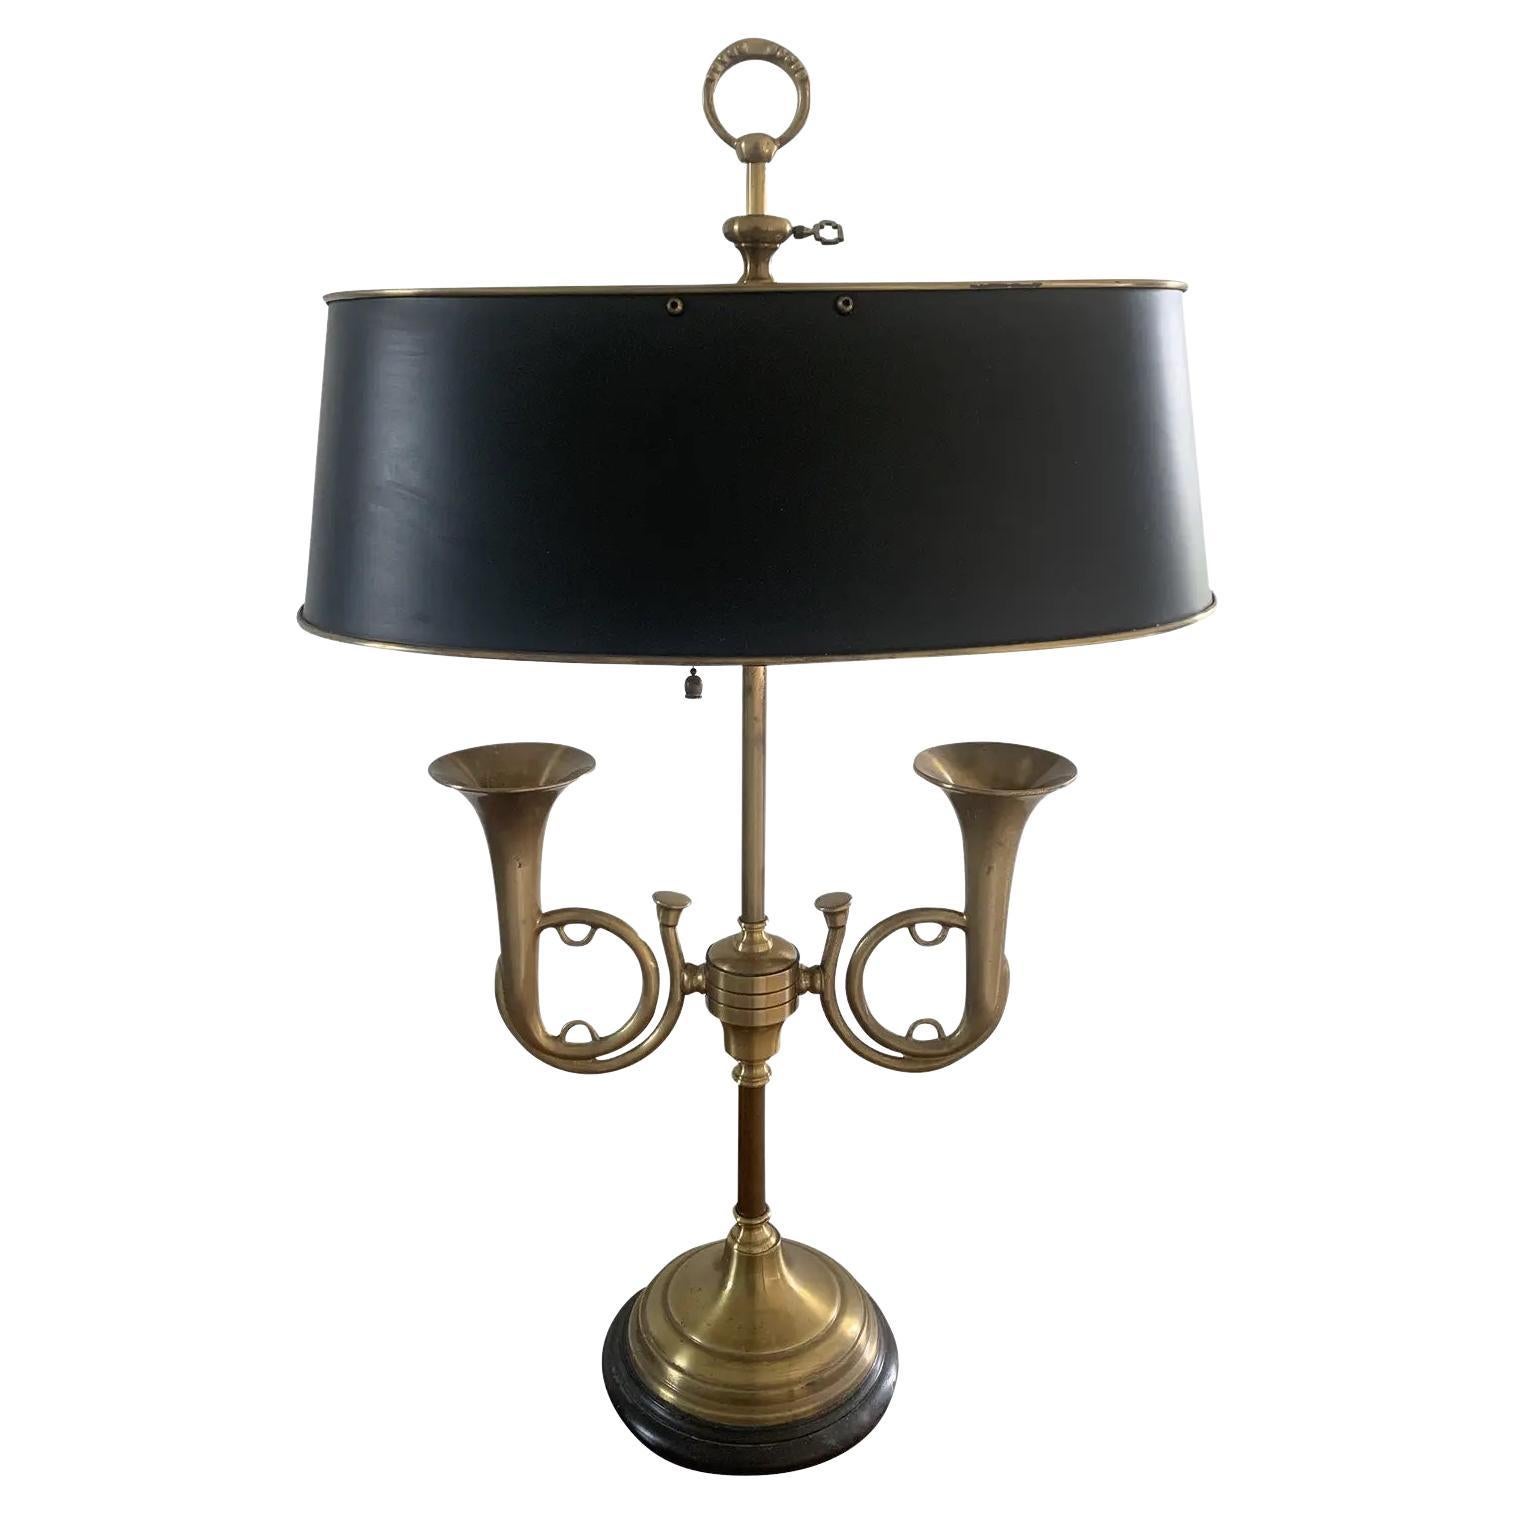 Mid-20th Century Brass Horn Bouillotte Lamp with Black Tole Shade For Sale